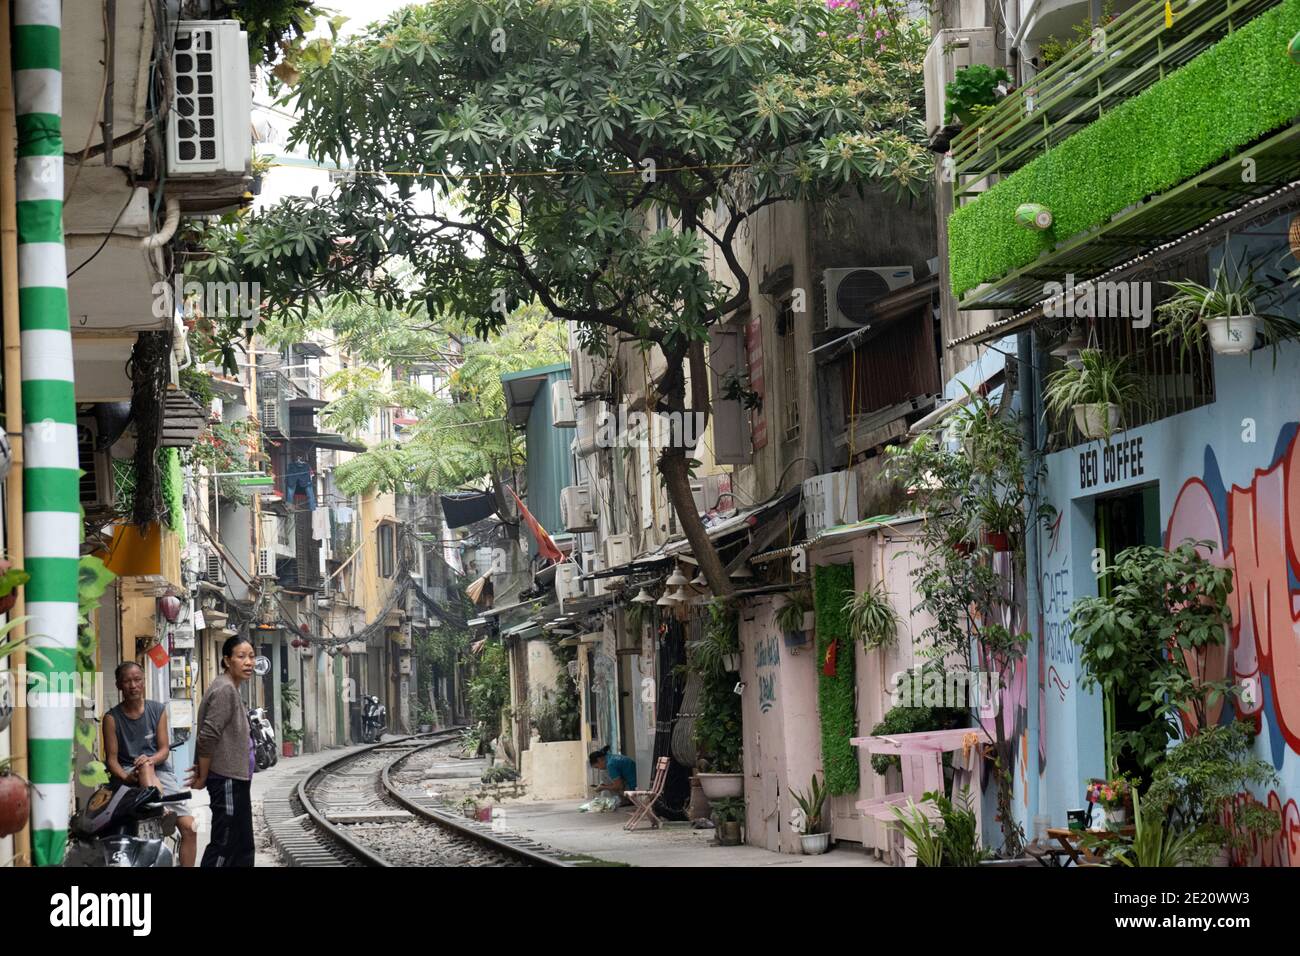 People socializing along a railway line running between buildings in Hanoi Stock Photo